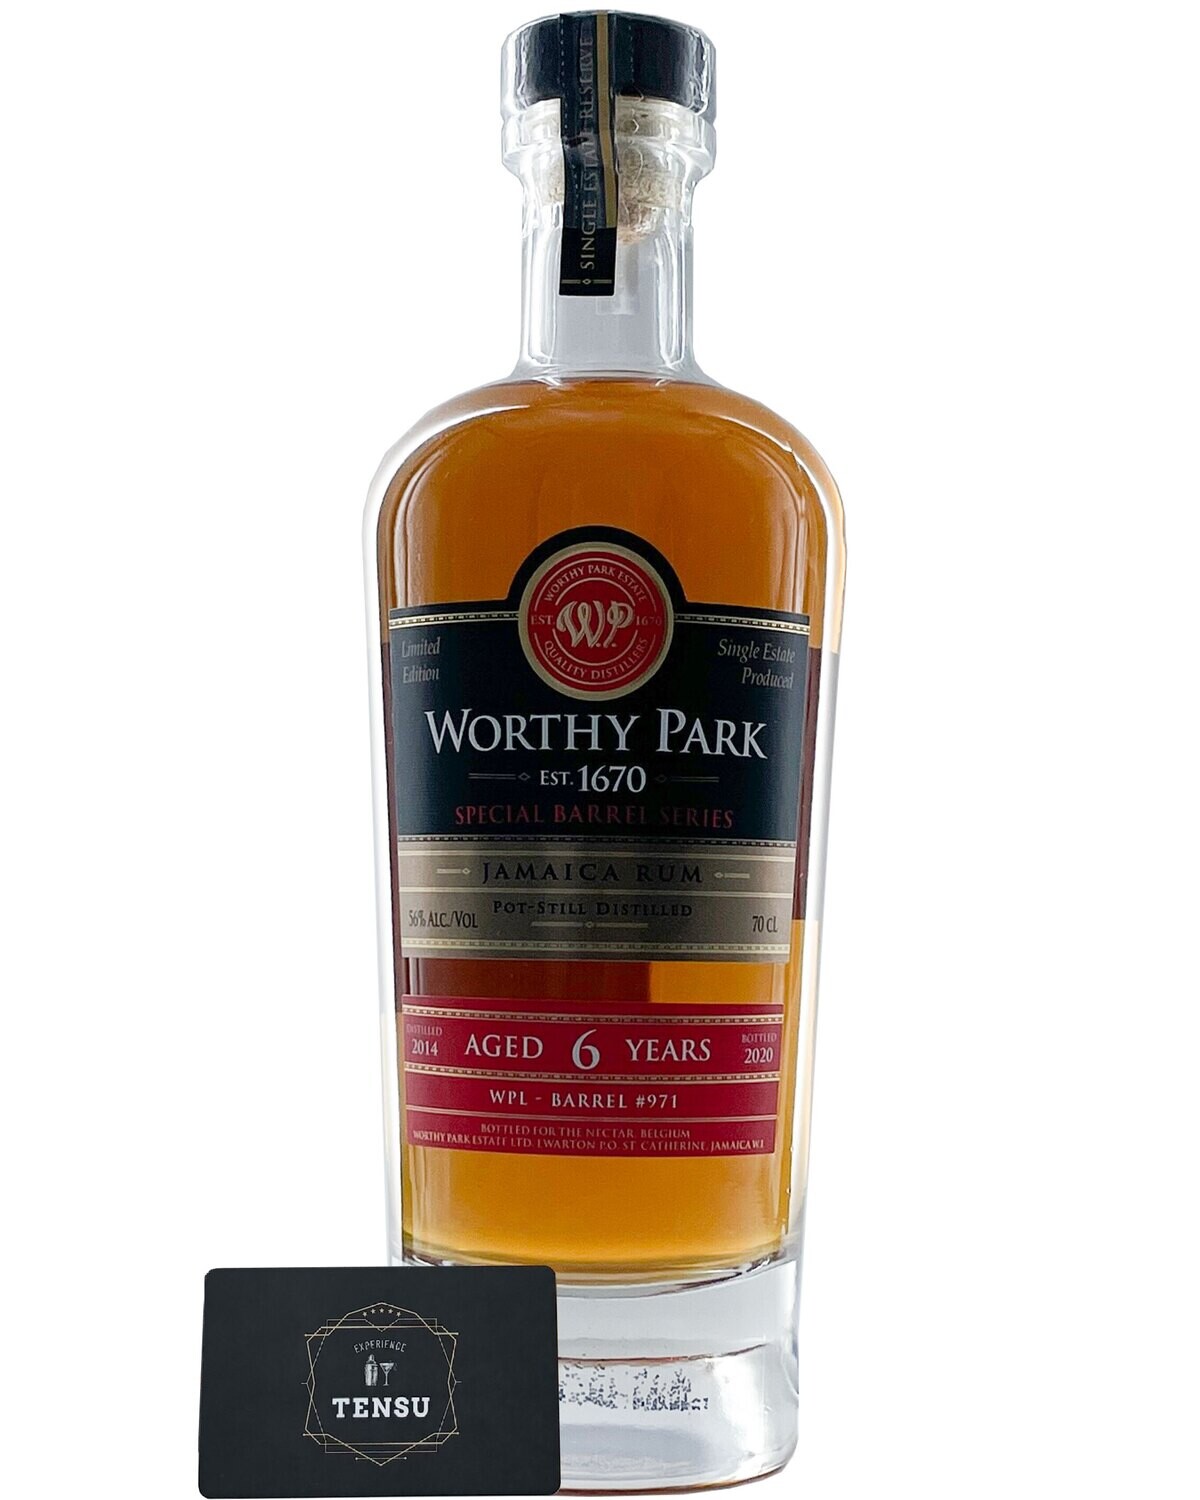 Worthy Park Special Barrel Series (2014-2020) 56,0 "The Nectar"